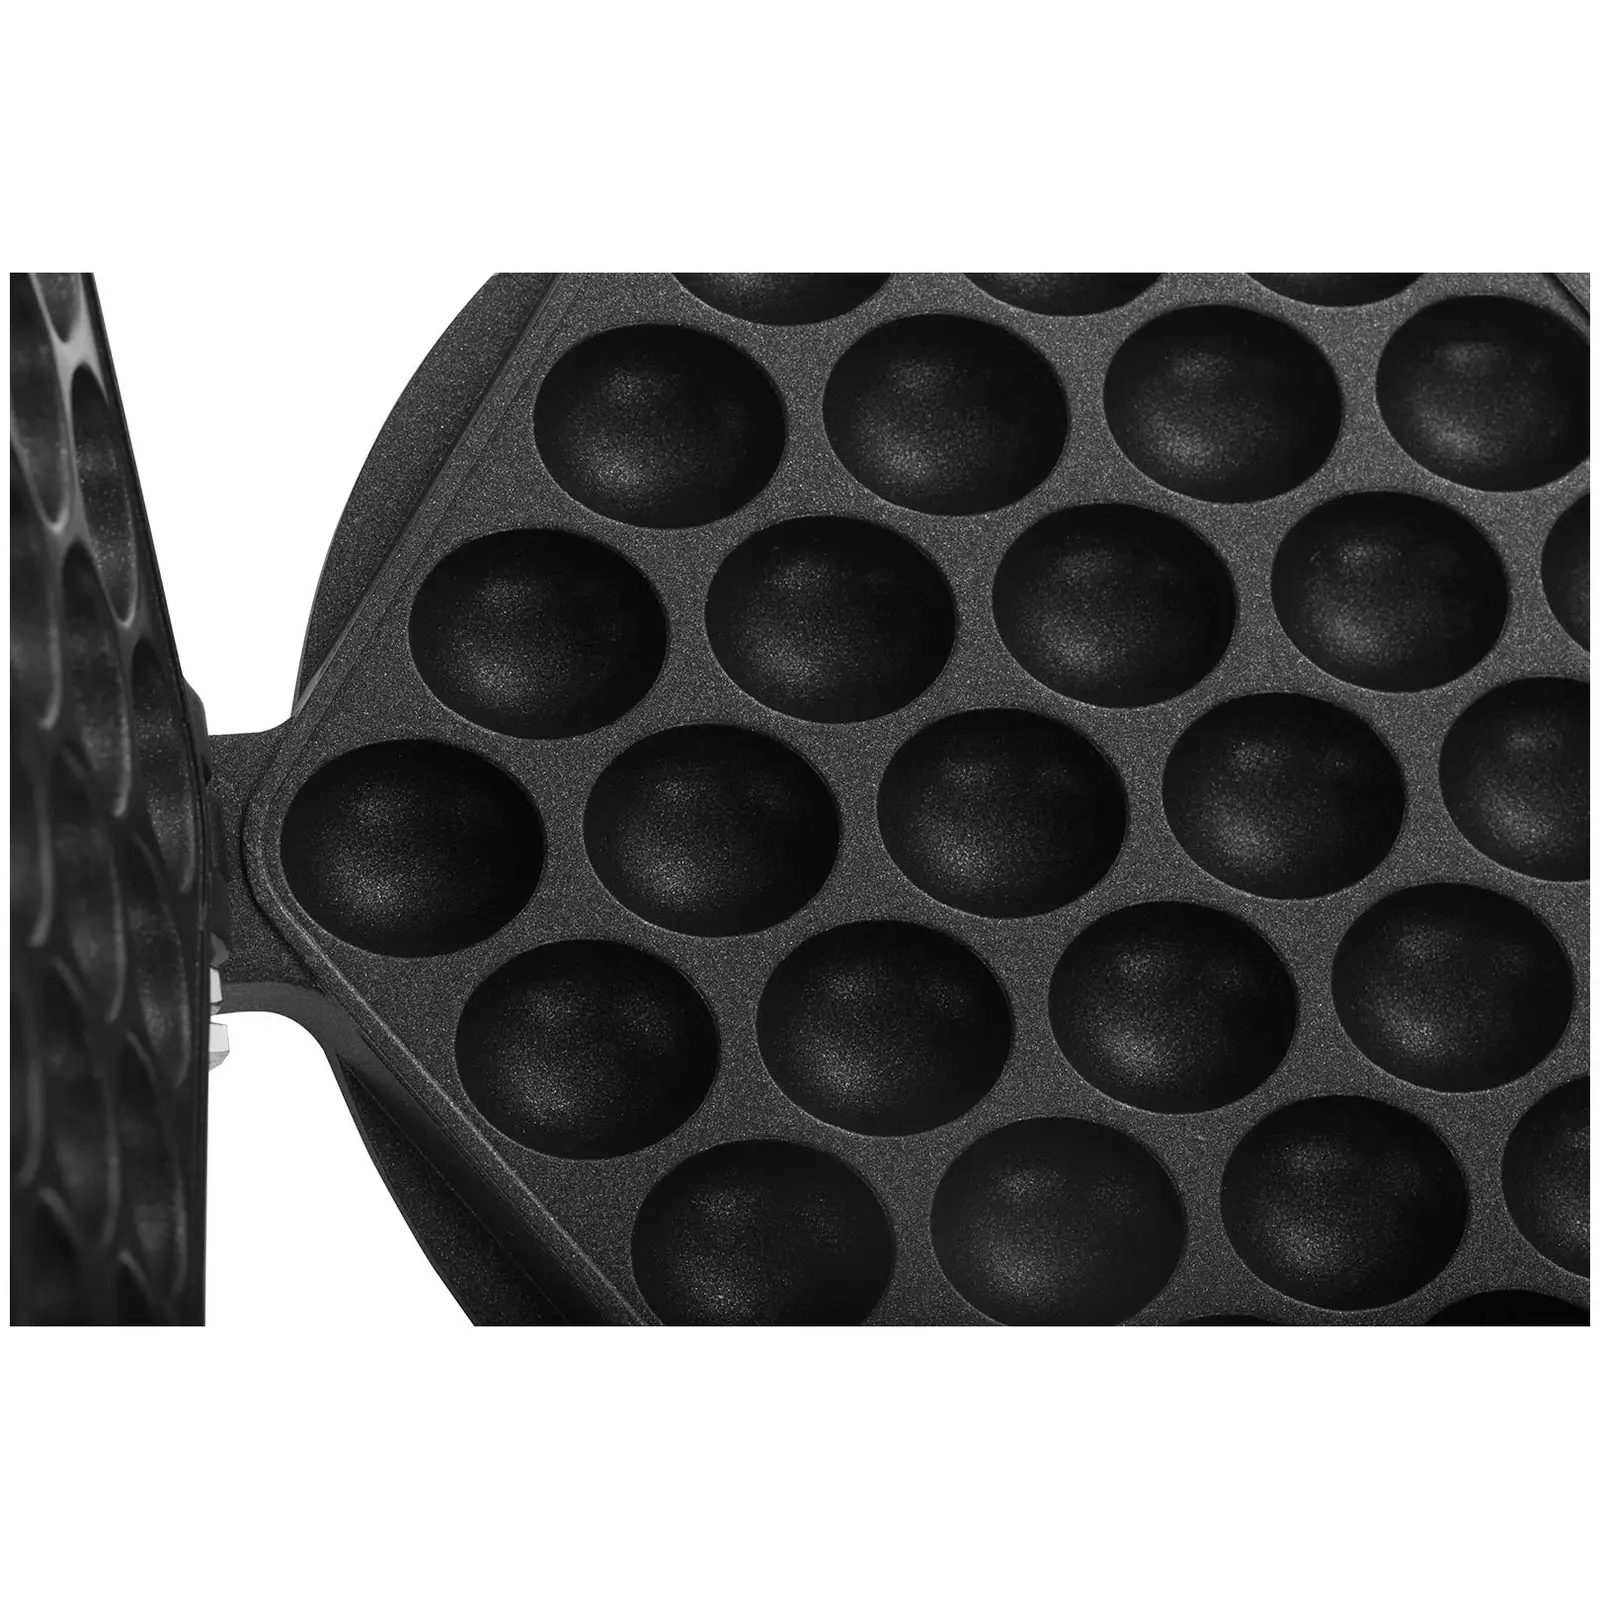 Baking Plate For Bubble Waffle Maker